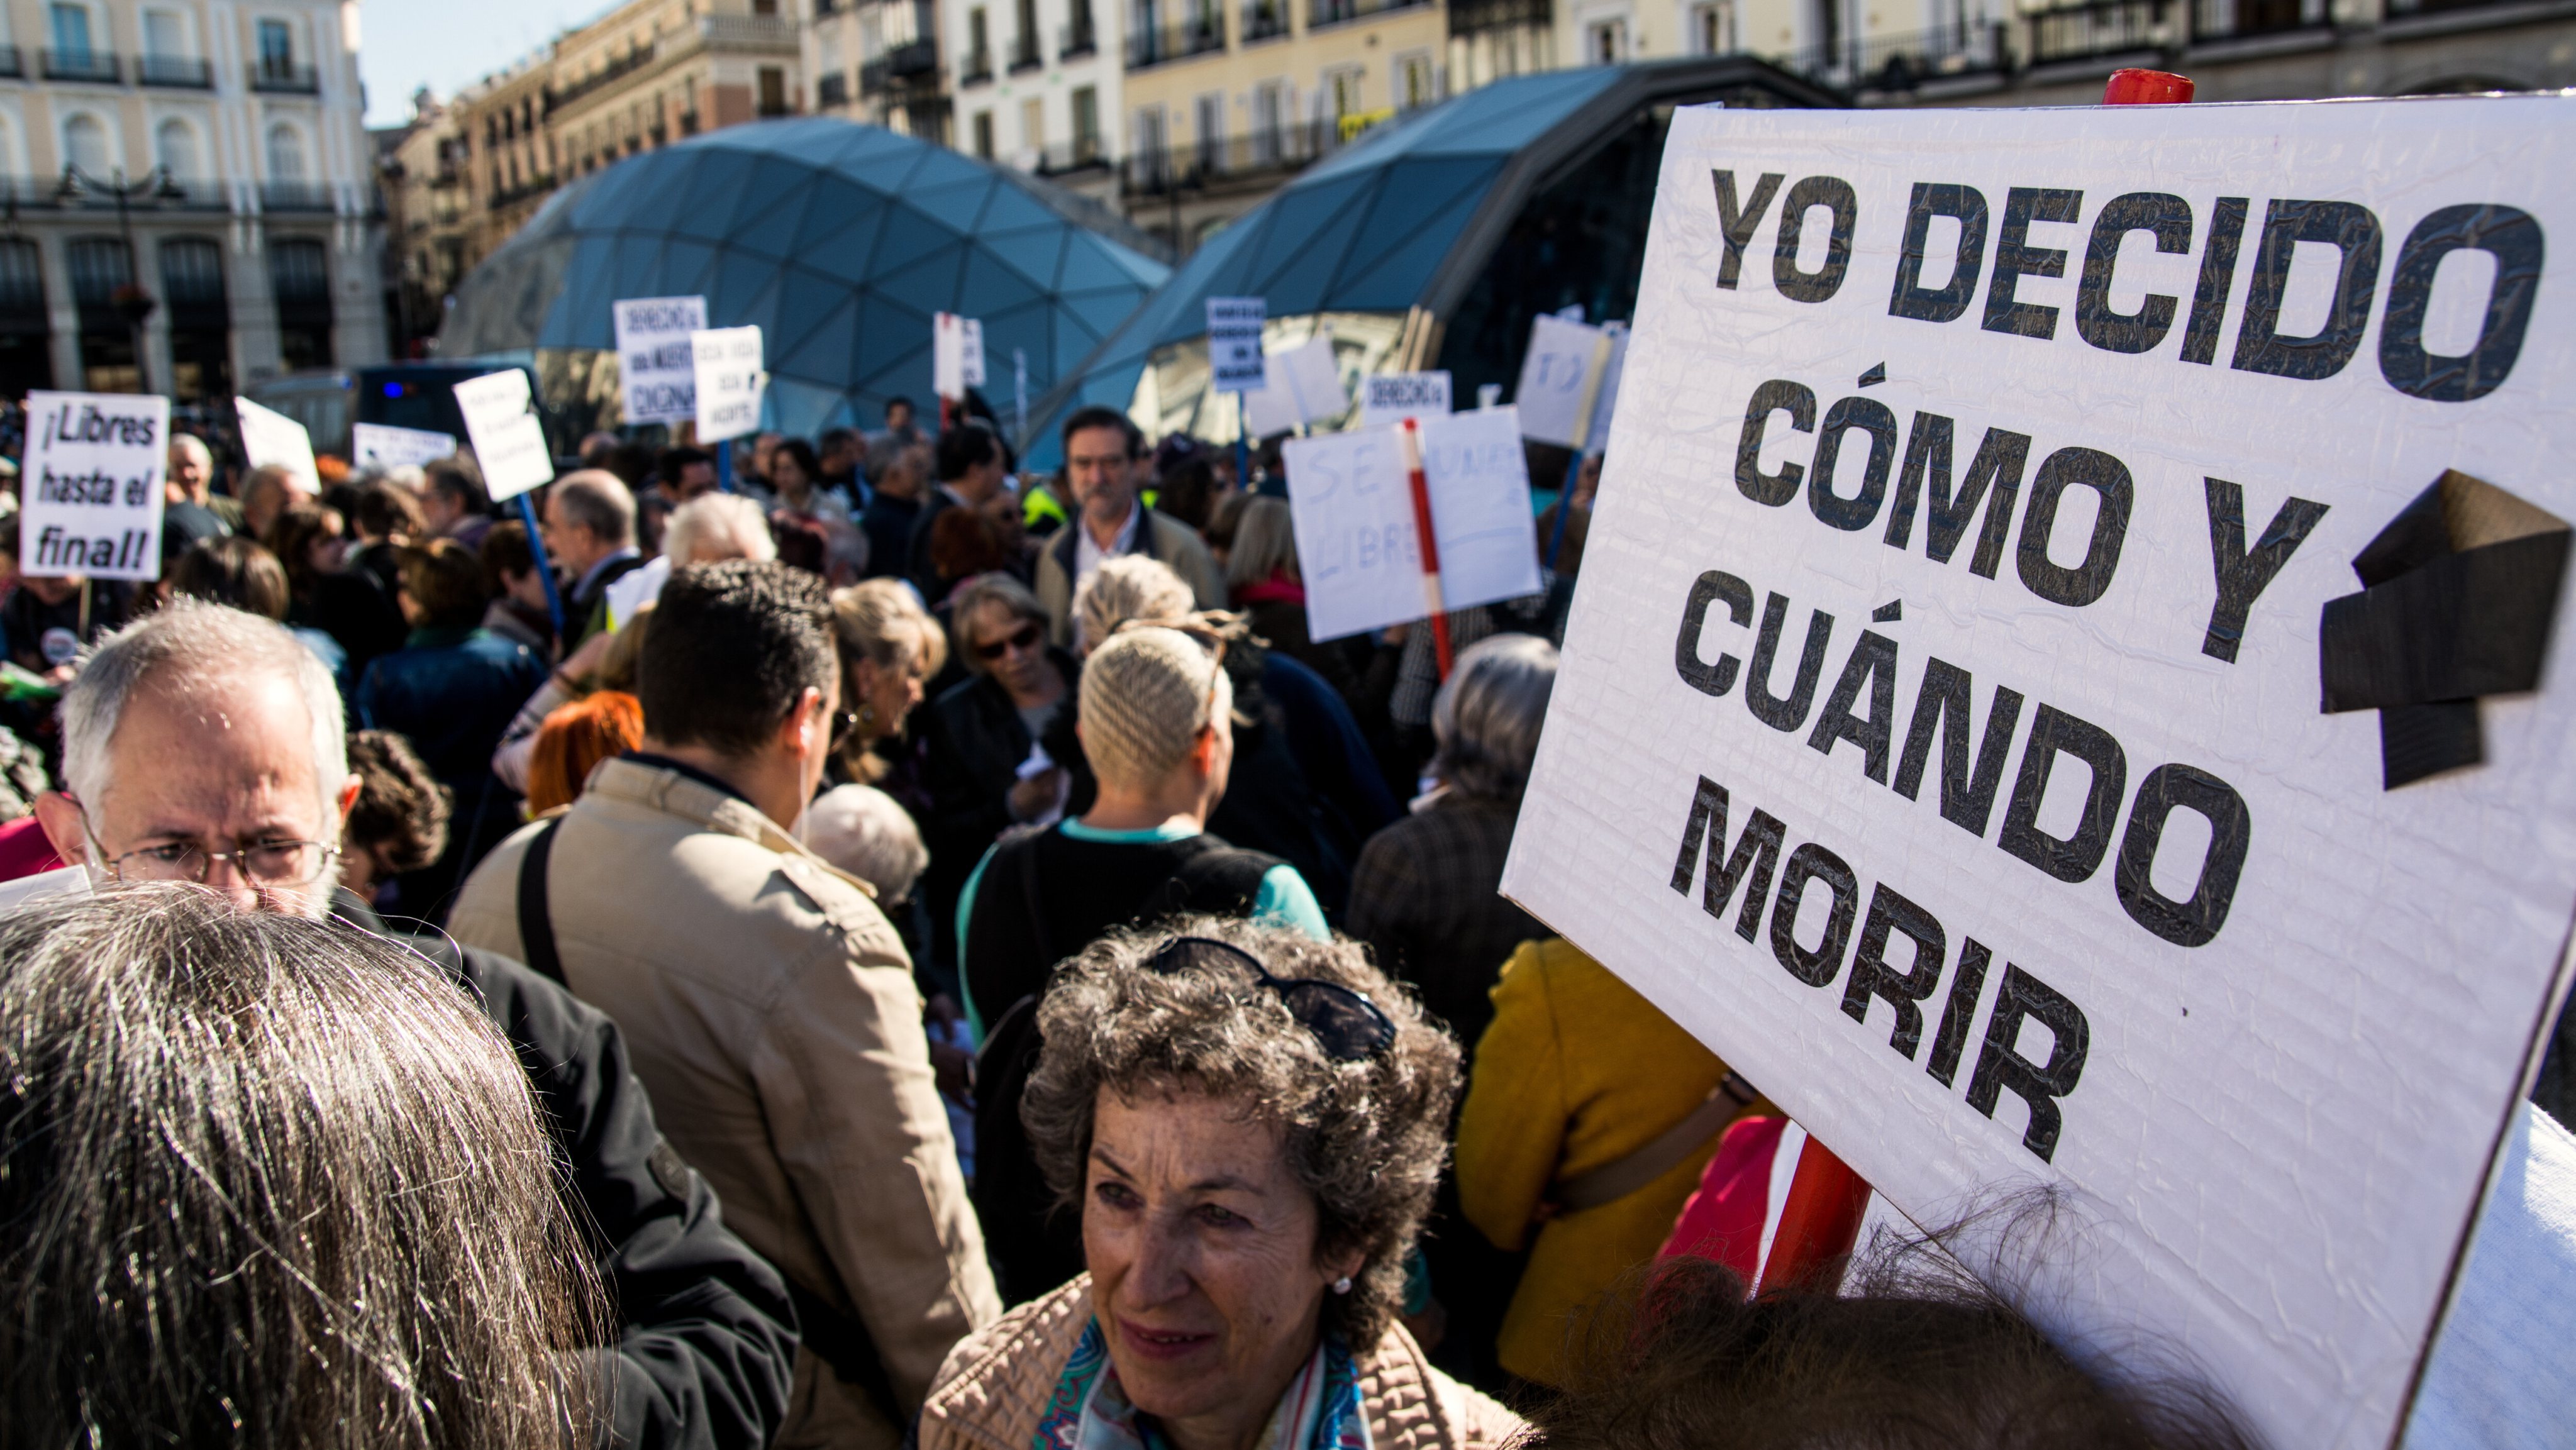 People protest in Madrid demanding freedom for dignified